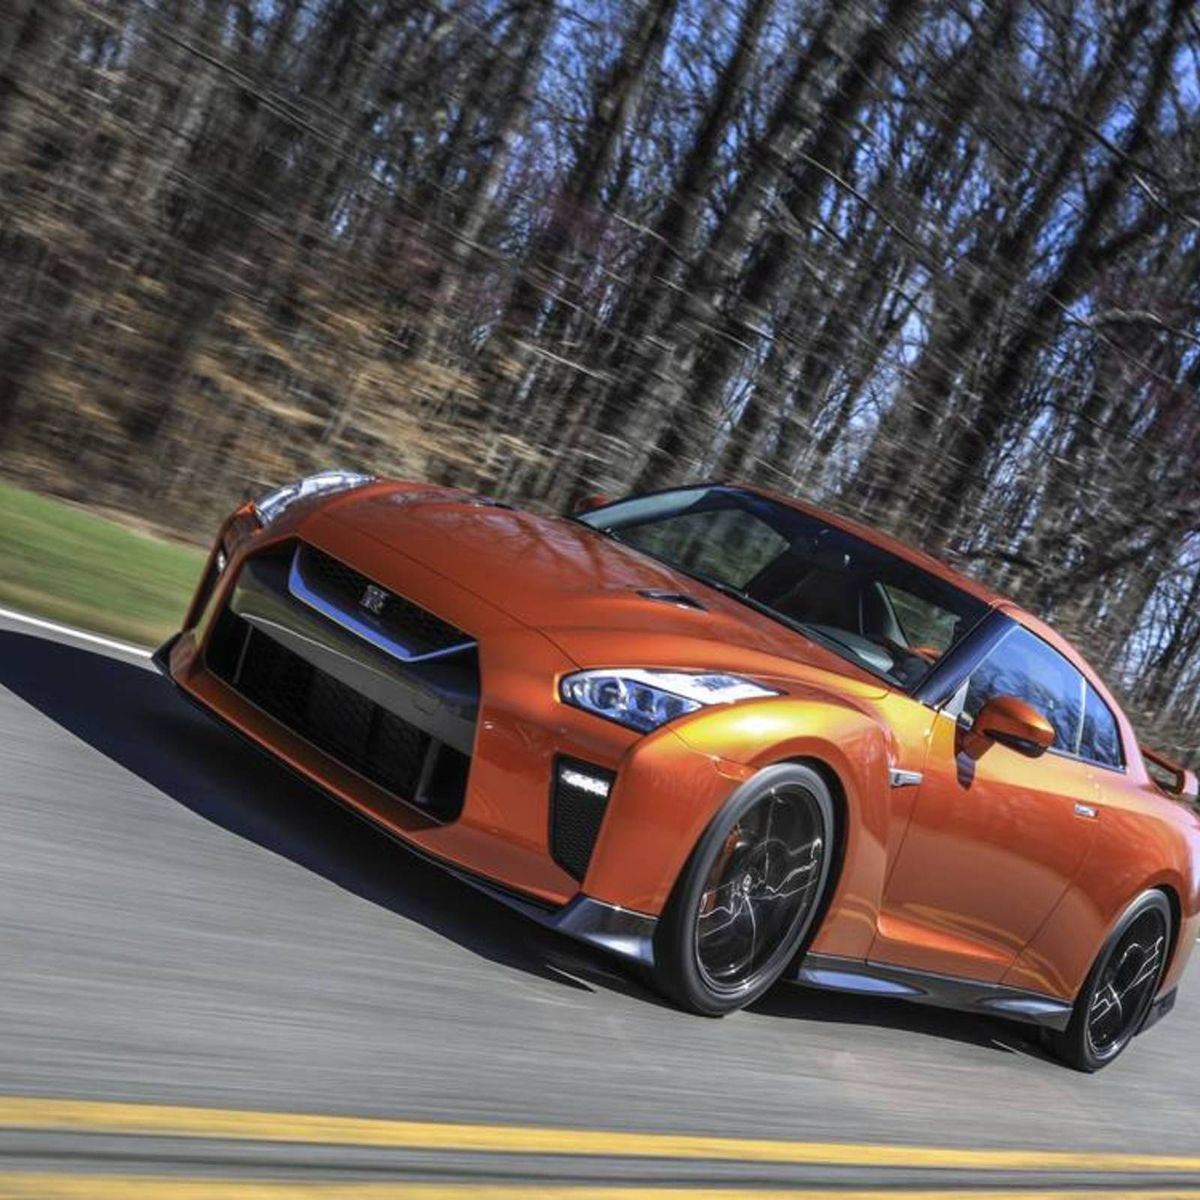 2017 Nissan GT-R Premium review: The of century,